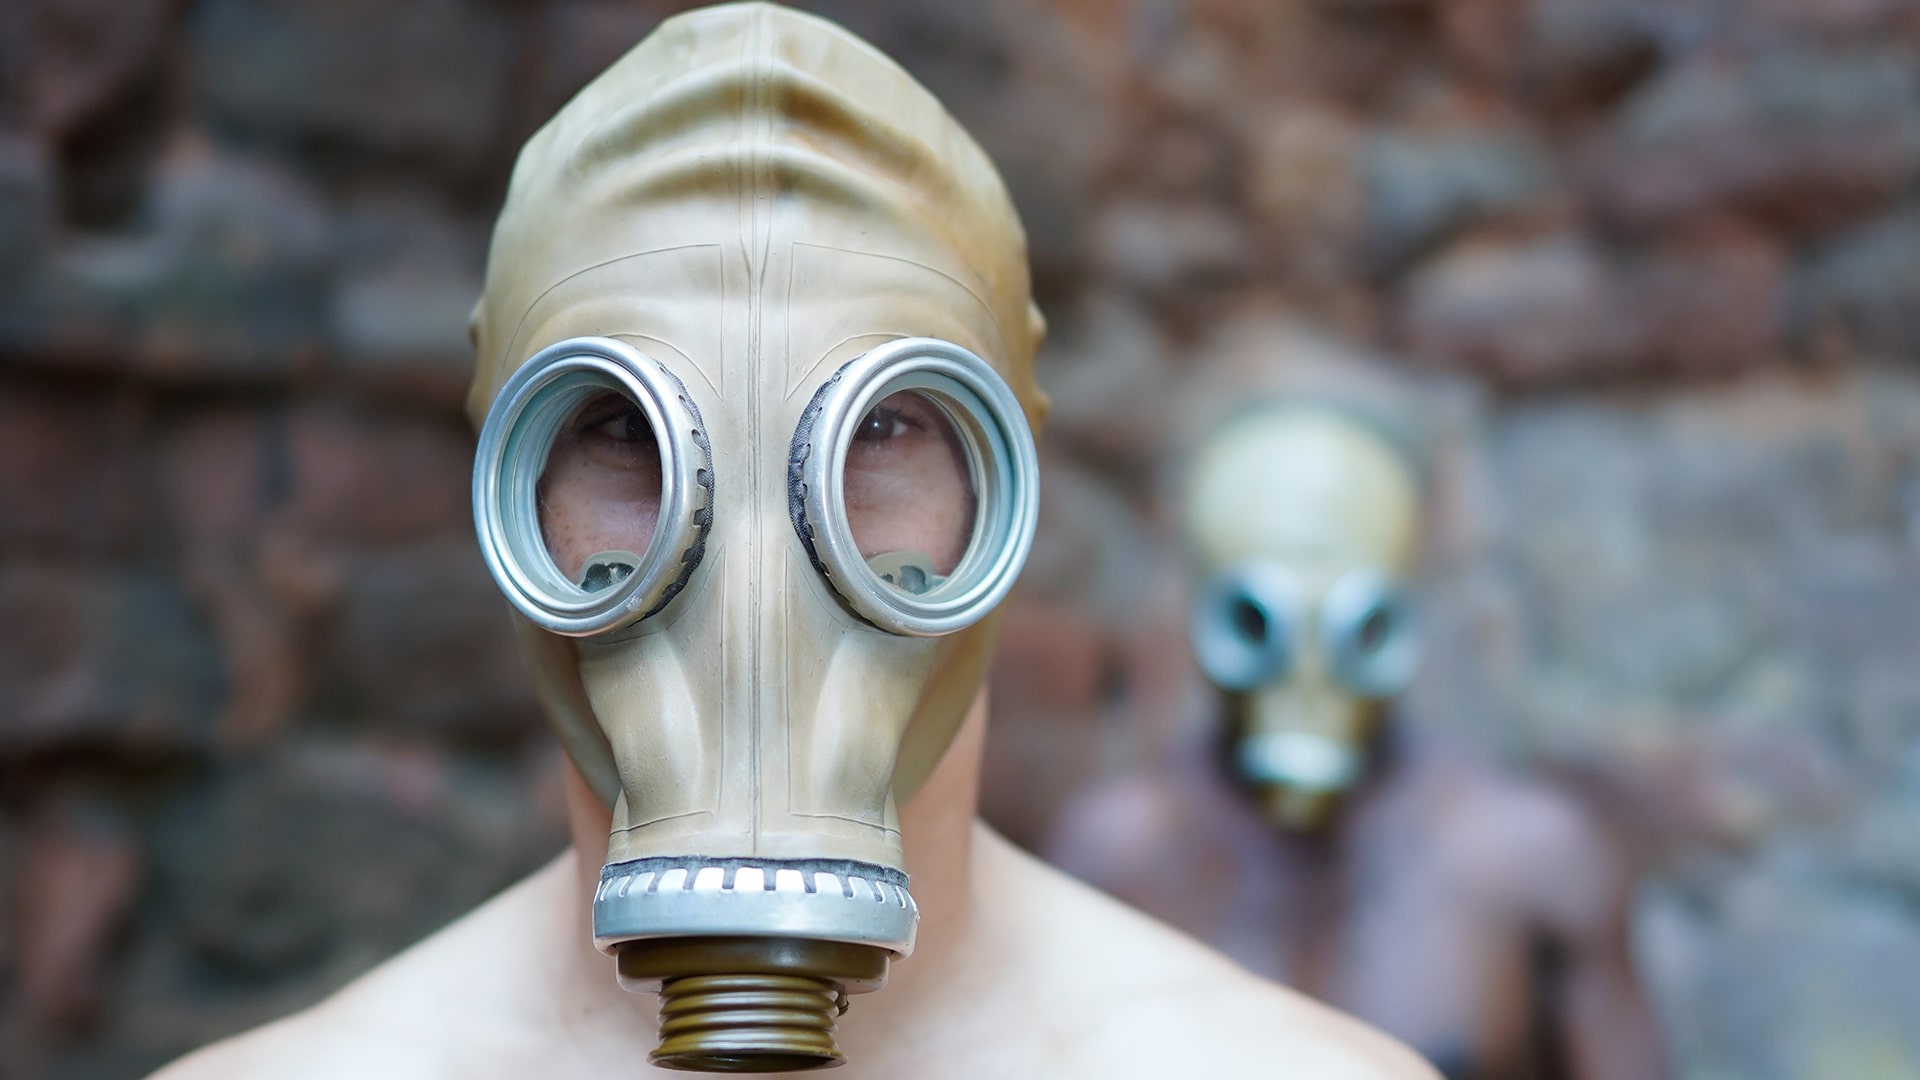 two performers wearing gas masks - one standing in front of the other